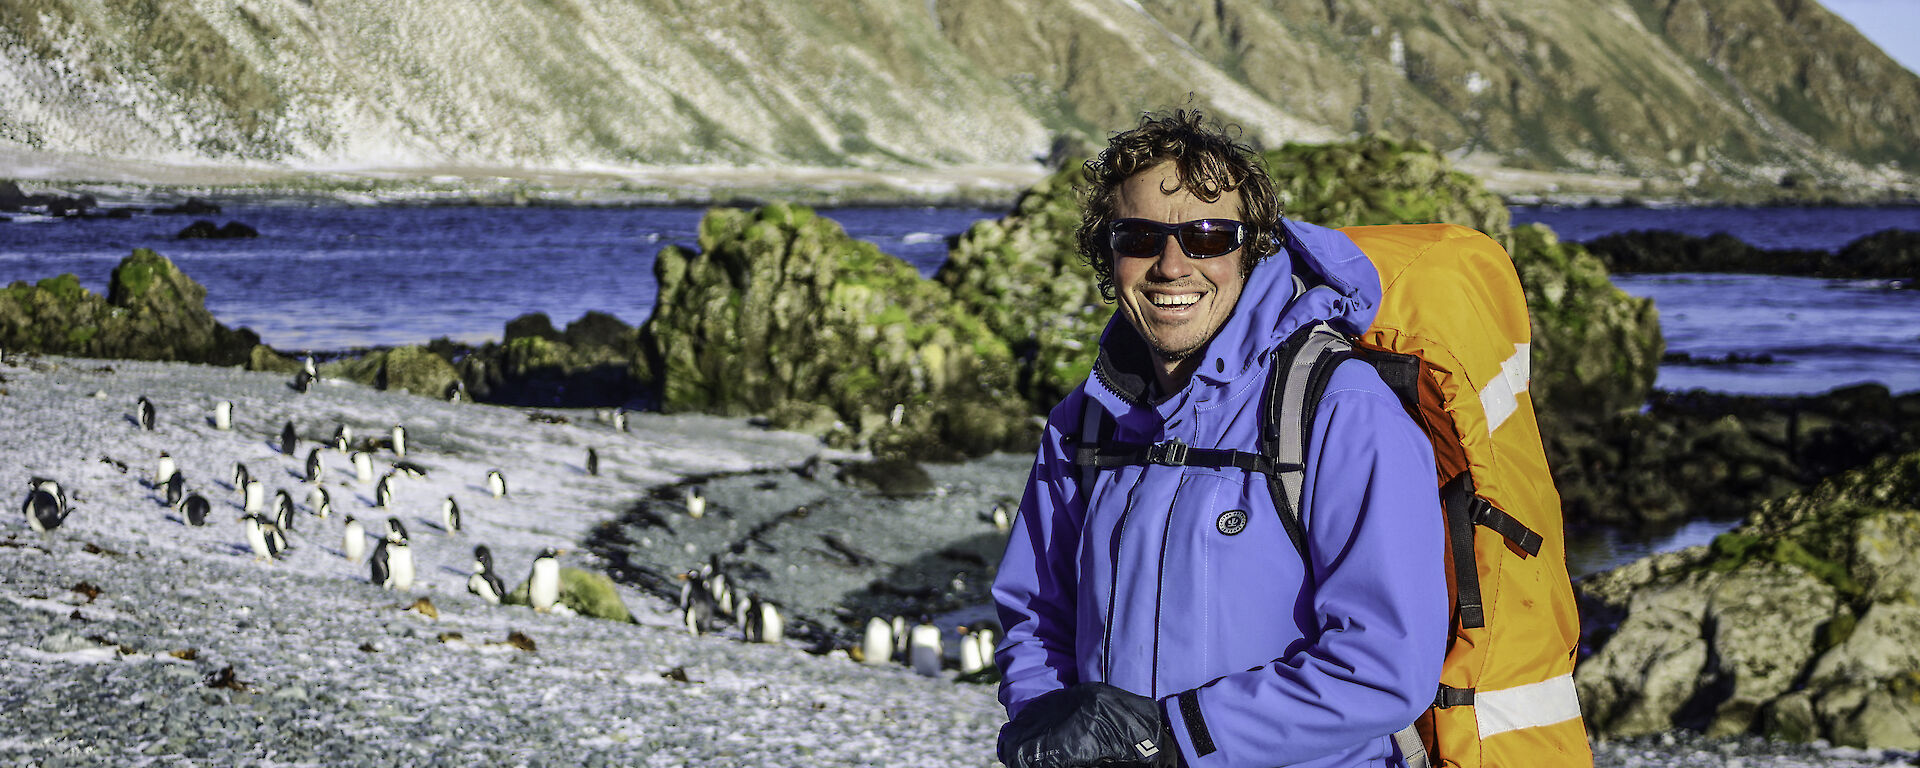 A man with a backpack and walking gear smiles to camera.  Behind him on the shore are a group of penguins and snow dusted mountains.